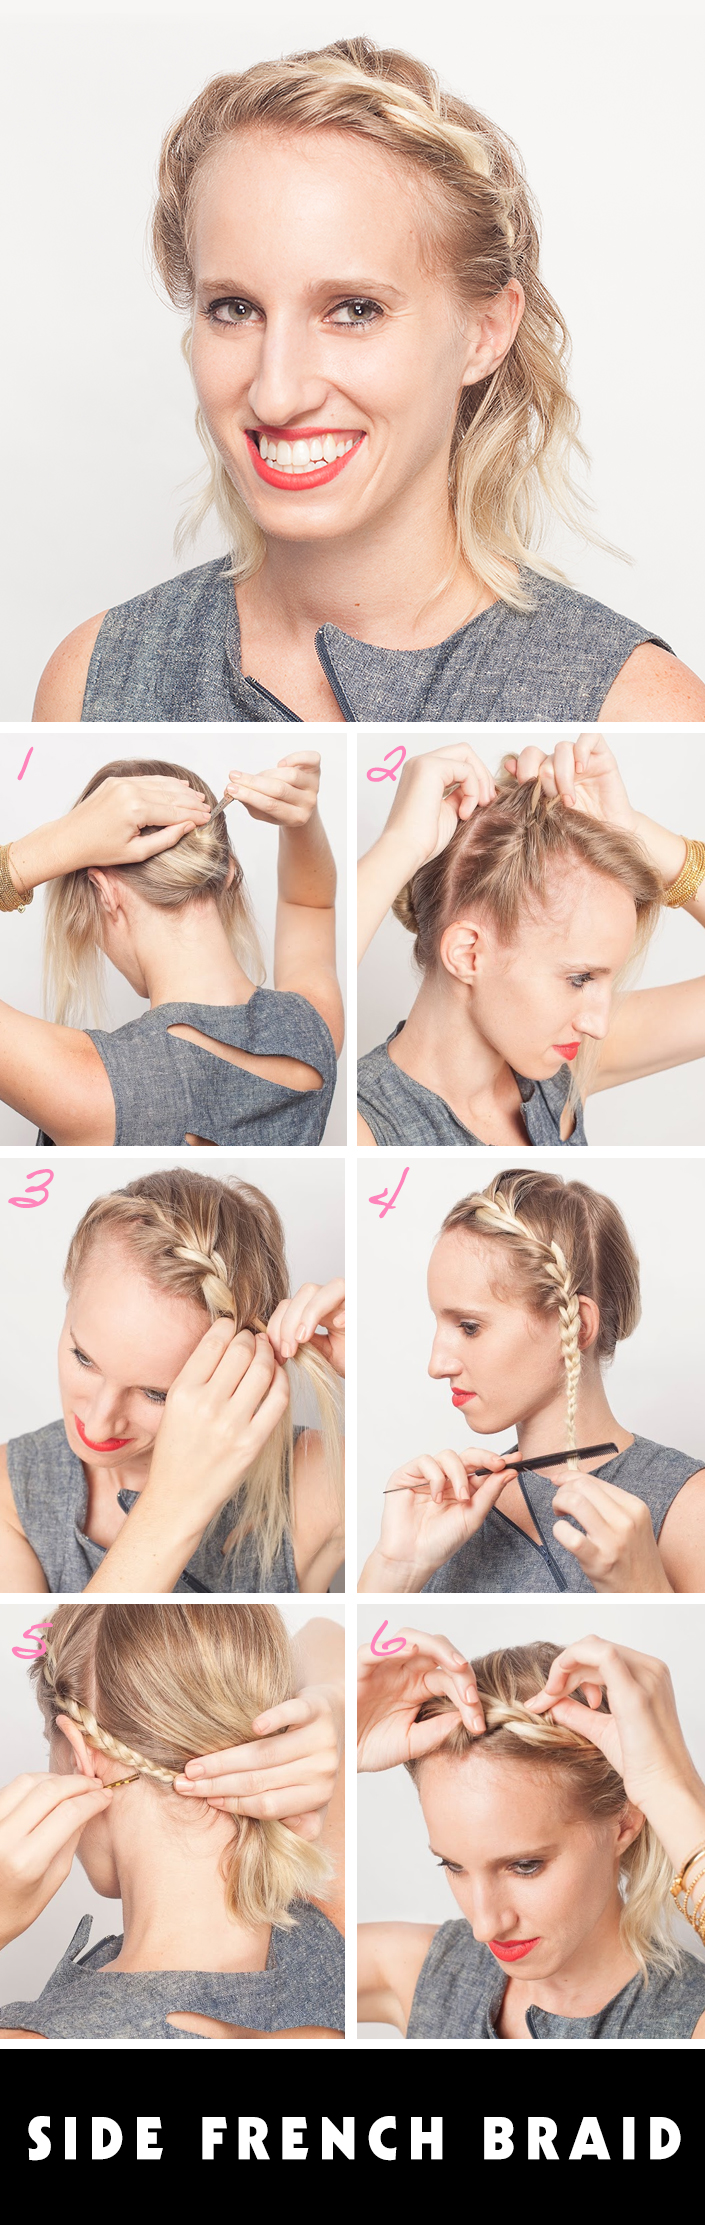 Side French Braid Tutorial: How to Style Your Hair | StyleCaster